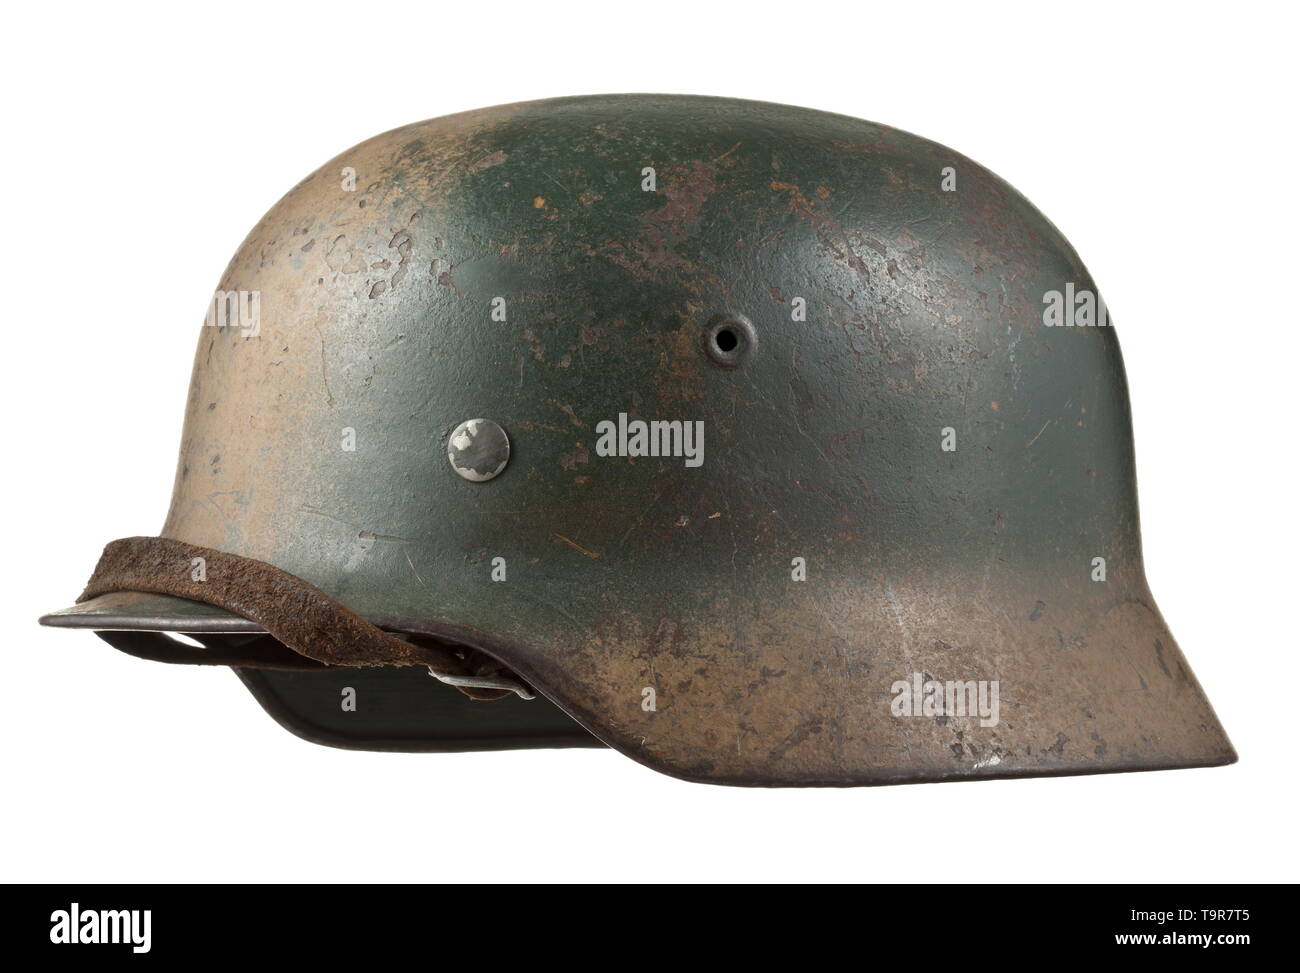 A steel helmet M 40 for army personnel in Normandy camouflage Steel skull with contemporary green- and earth-brown camouflage, the interior with maker stamps 'NS66' and 'D160', inner liner complete with chinstrap. historic, historical, army, armies, armed forces, military, militaria, object, objects, stills, clipping, clippings, cut out, cut-out, cut-outs, 20th century, Editorial-Use-Only Stock Photo